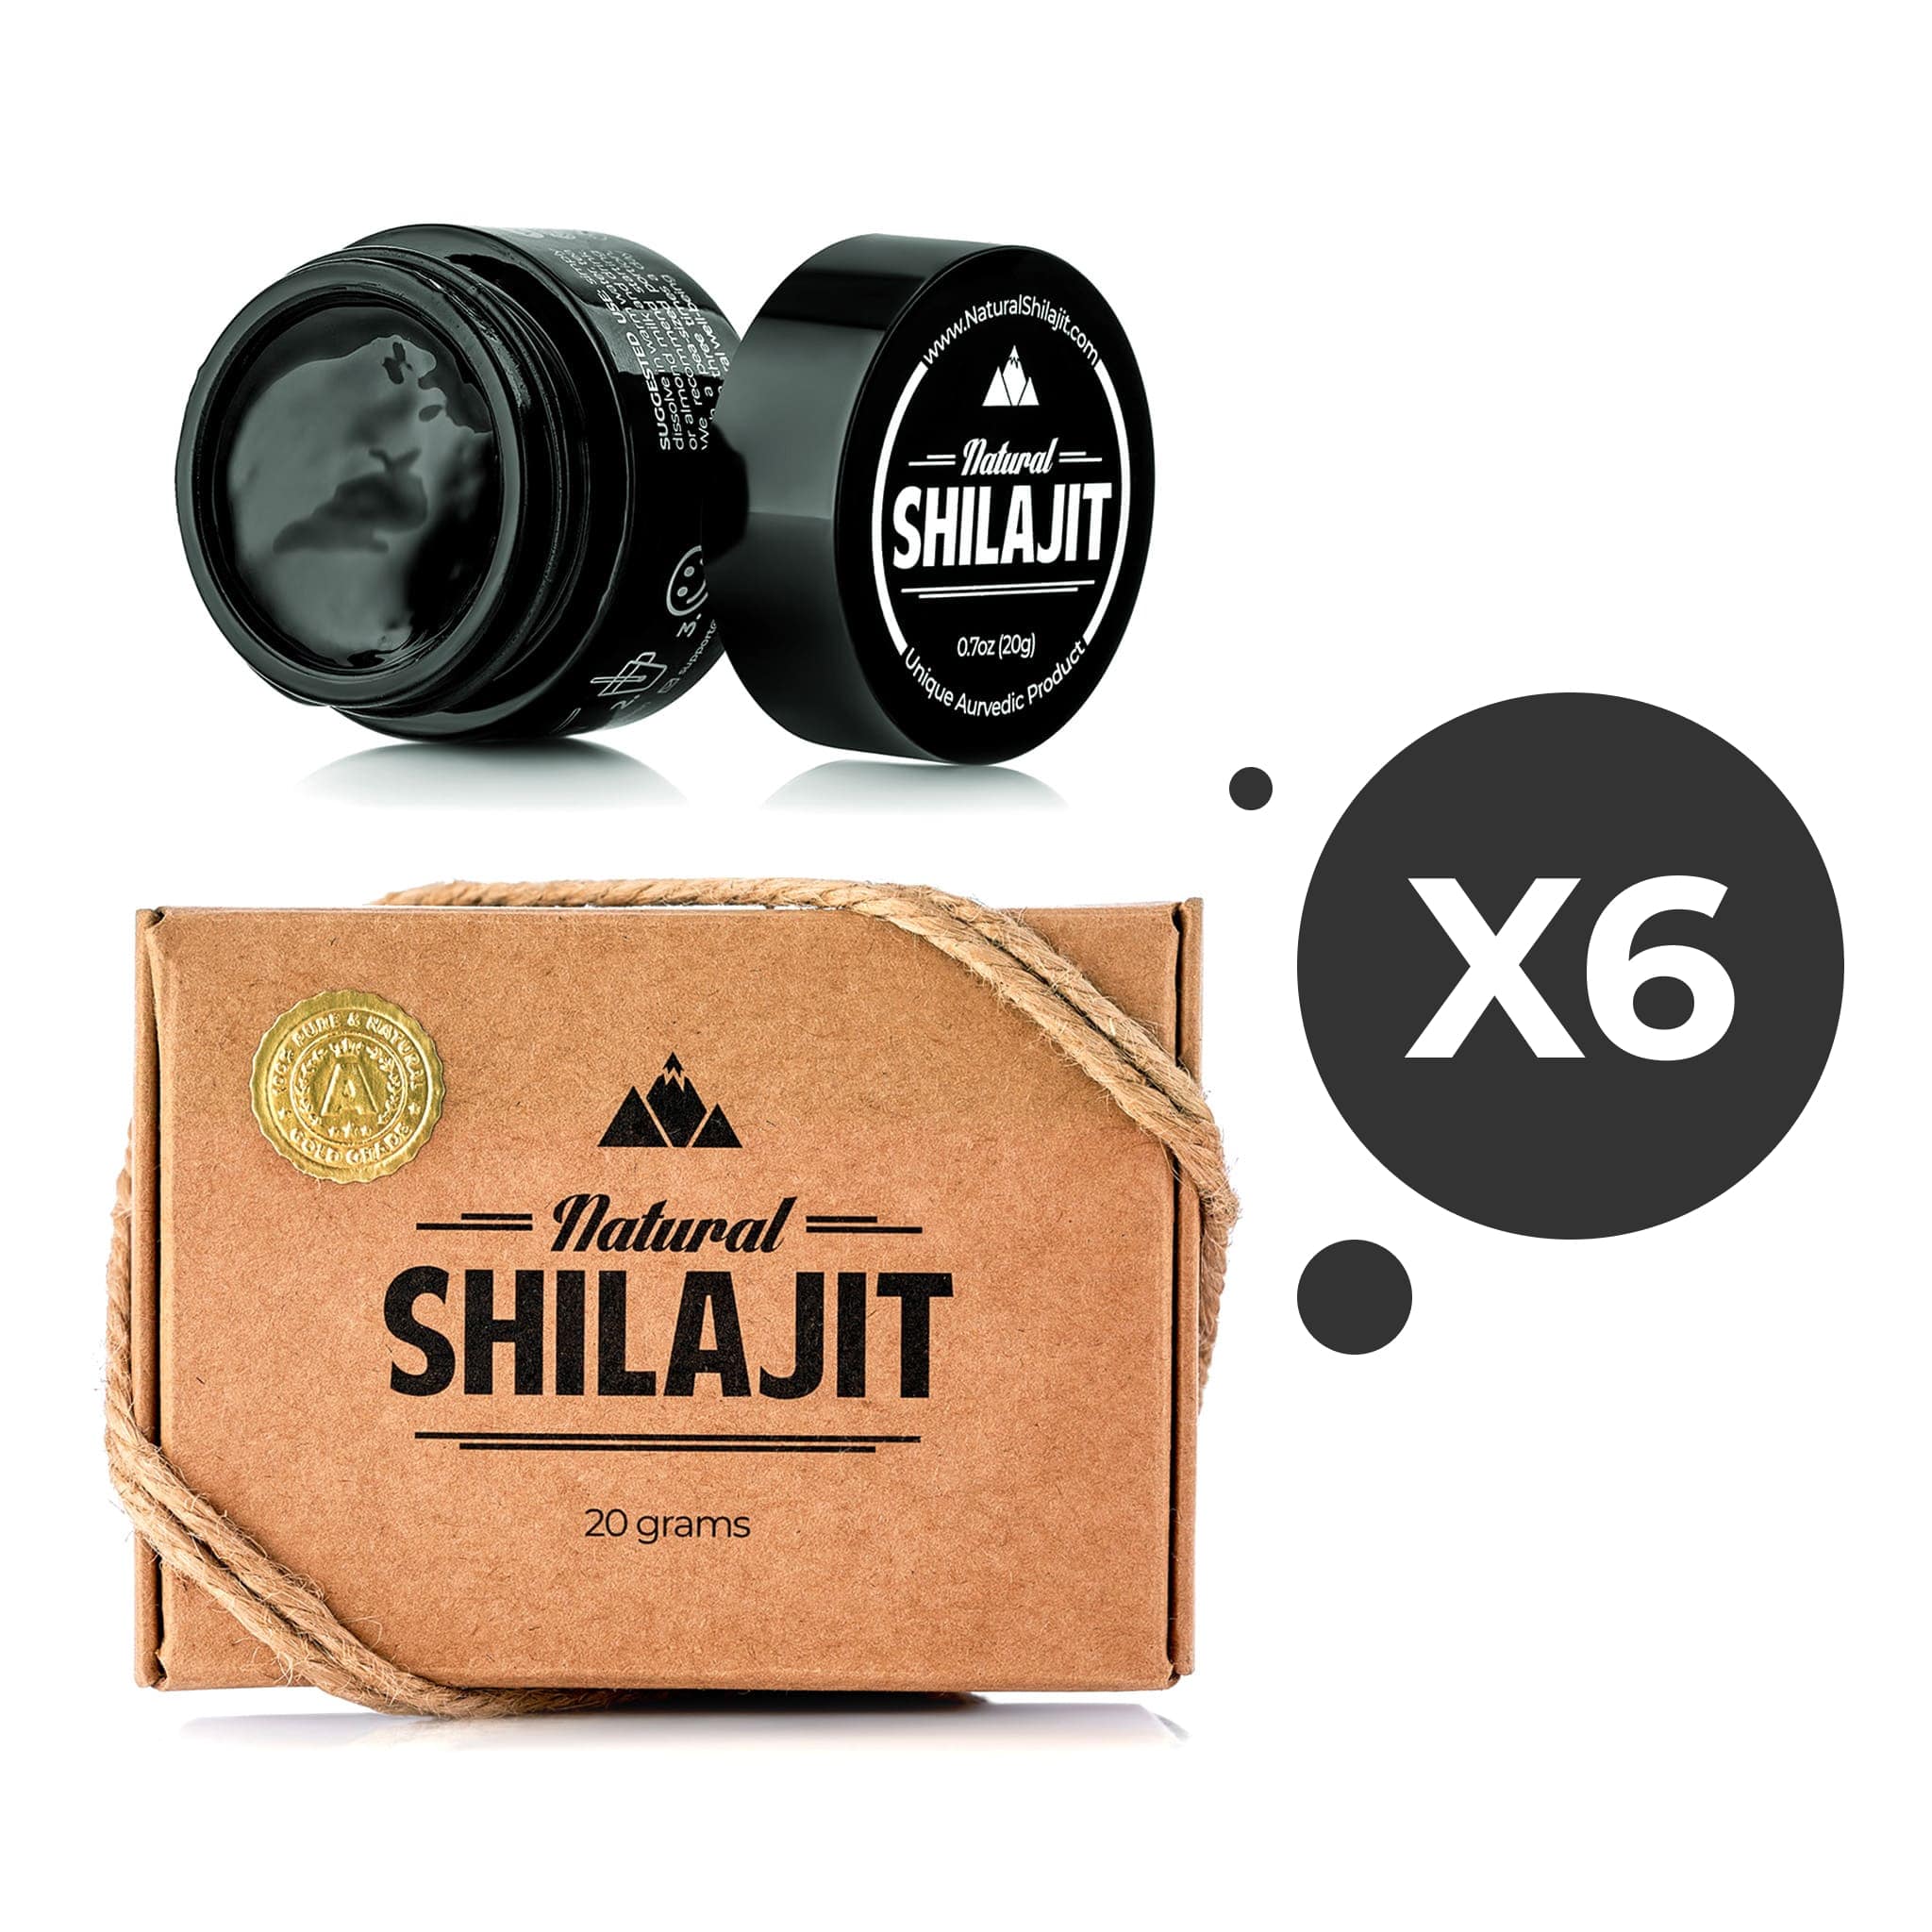 Nea Pure Shilajit: A Natural Way to Boost Your Energy, Improve Your Im